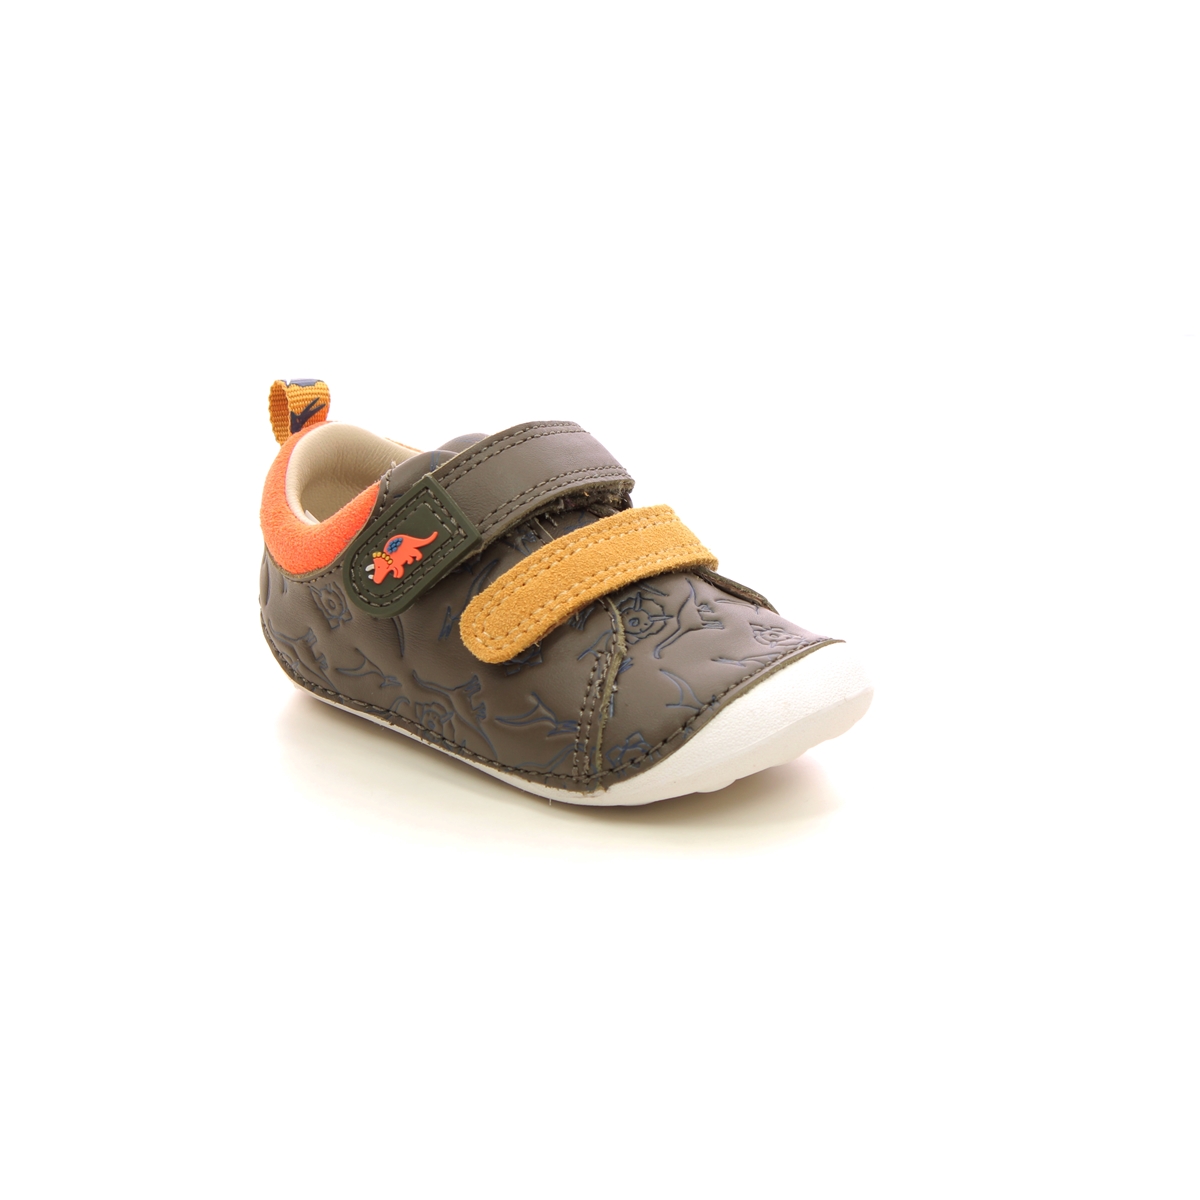 Clarks Tiny Rex T Khaki Leather Kids Boys First Shoes 7229-67G in a Plain Leather in Size 4